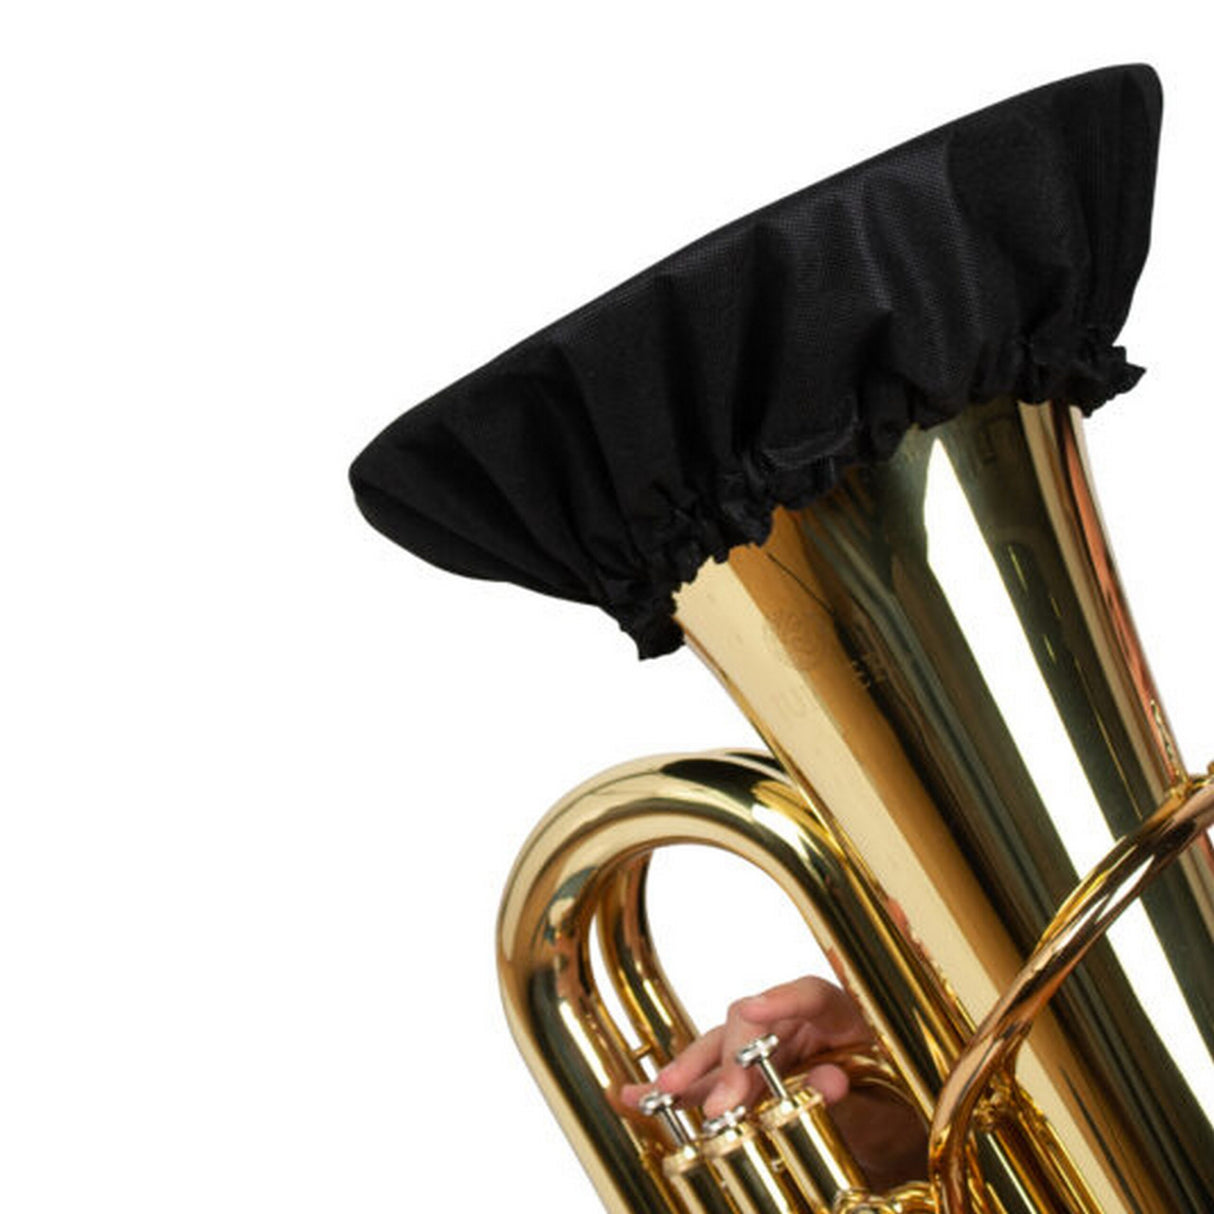 Gator GBELLCVR1415BK Wind Instrument Double-Layer Cover for Bell Sizes Ranging from 14 to 15-Inches, Black Color